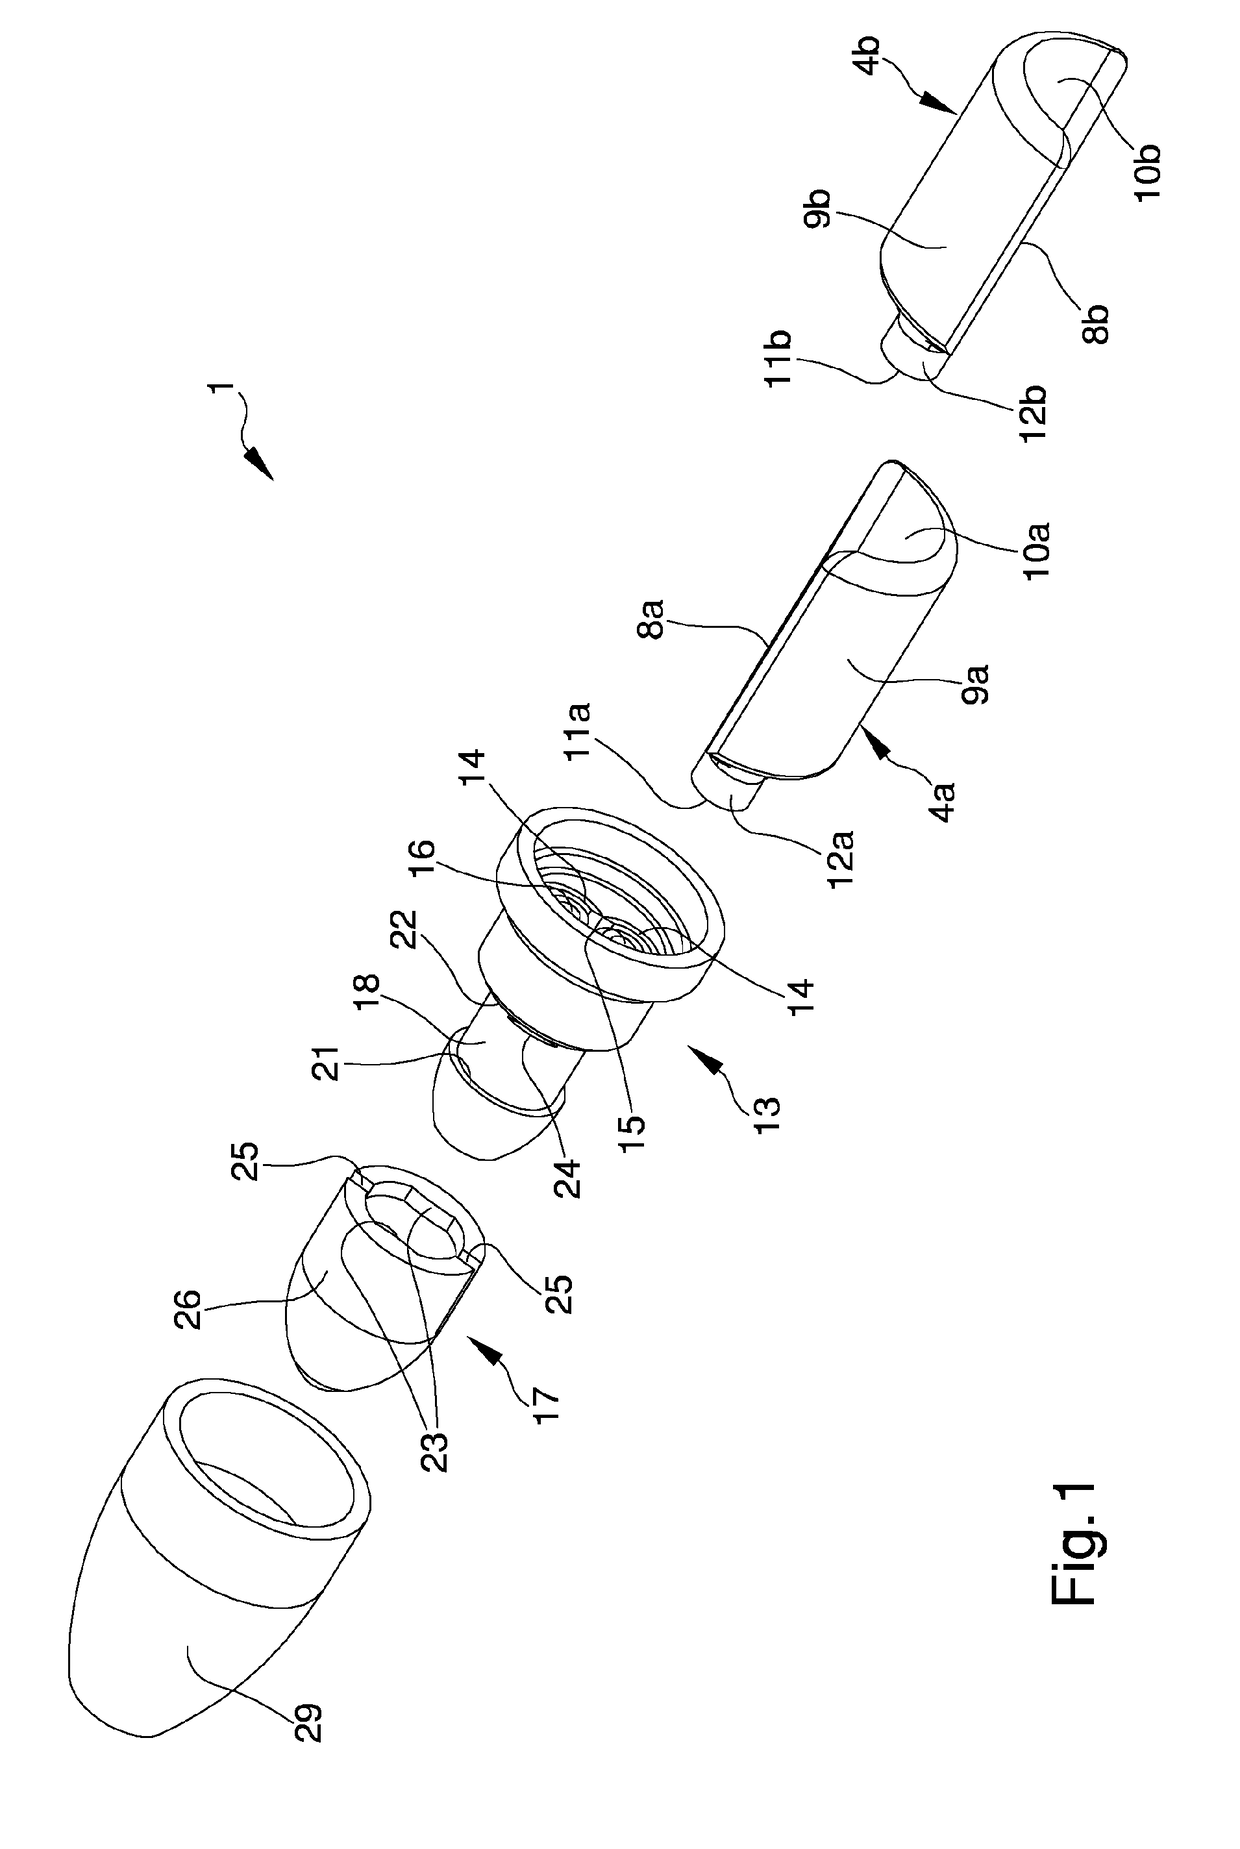 Container for fluid products, particularly pharmaceutical, cosmetic, medical products or the like